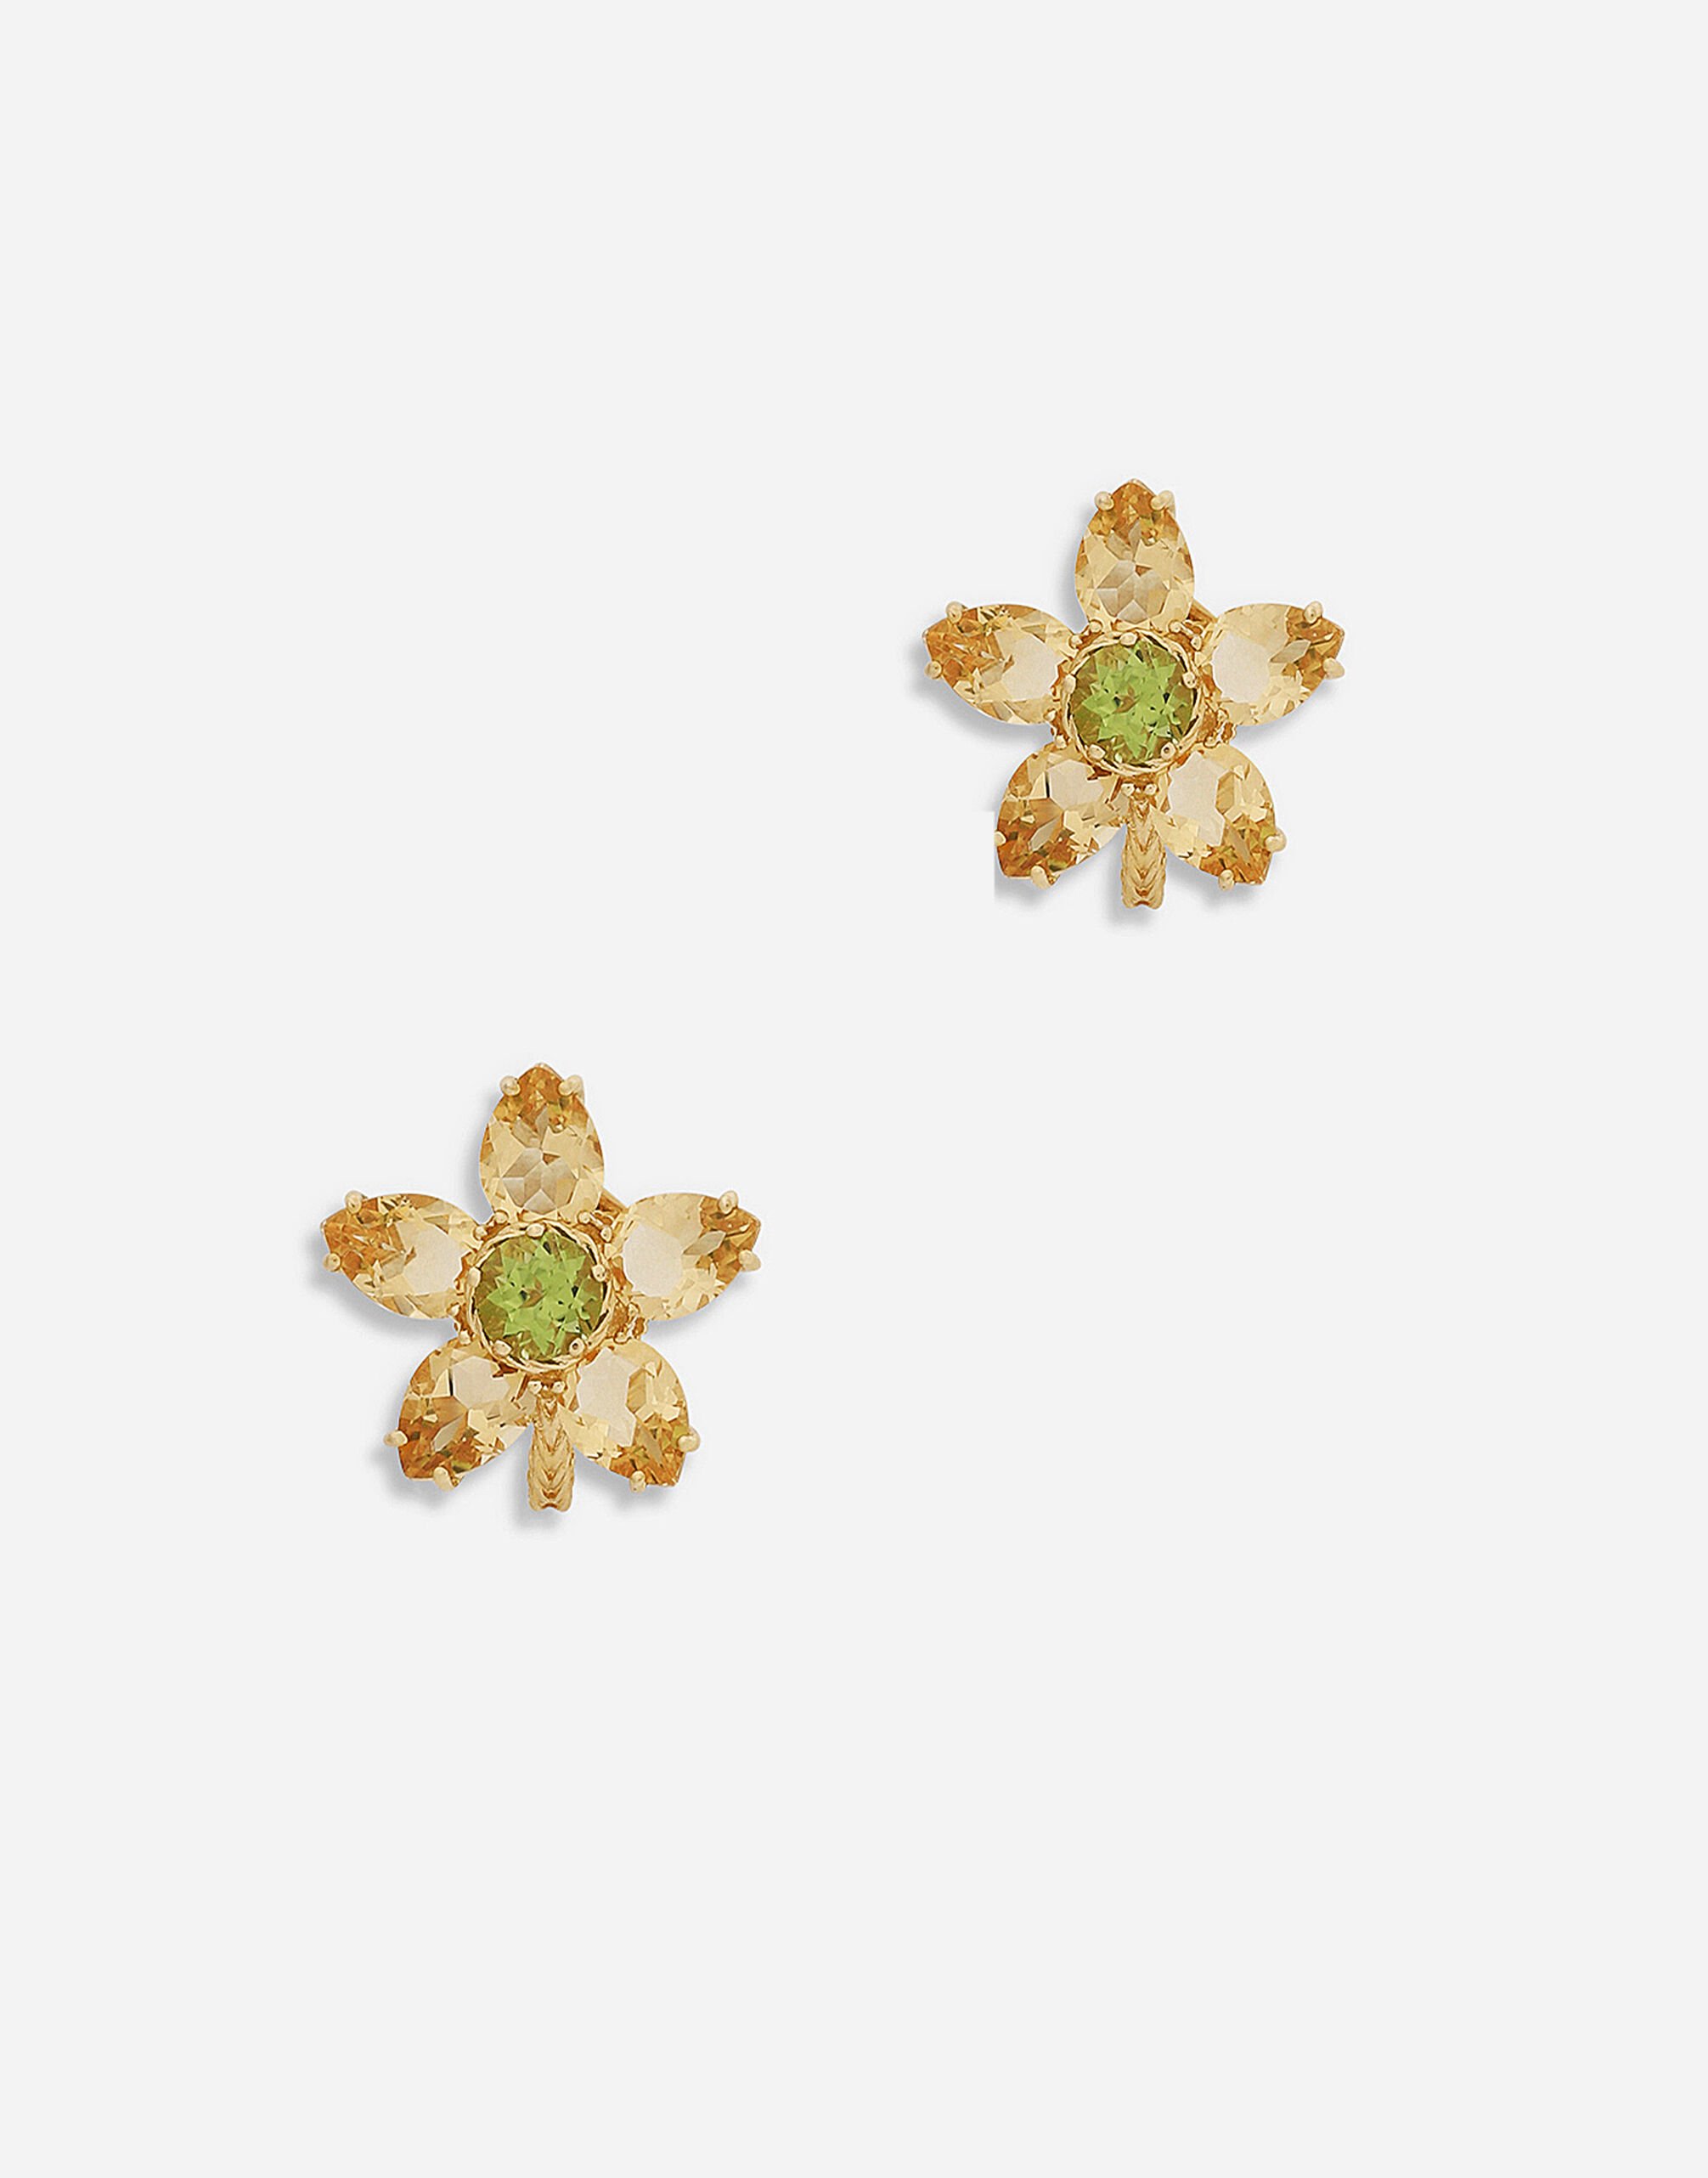 Dolce & Gabbana Spring earrings in yellow 18kt gold with citrine flower motif Gold WEJP1GWROD1